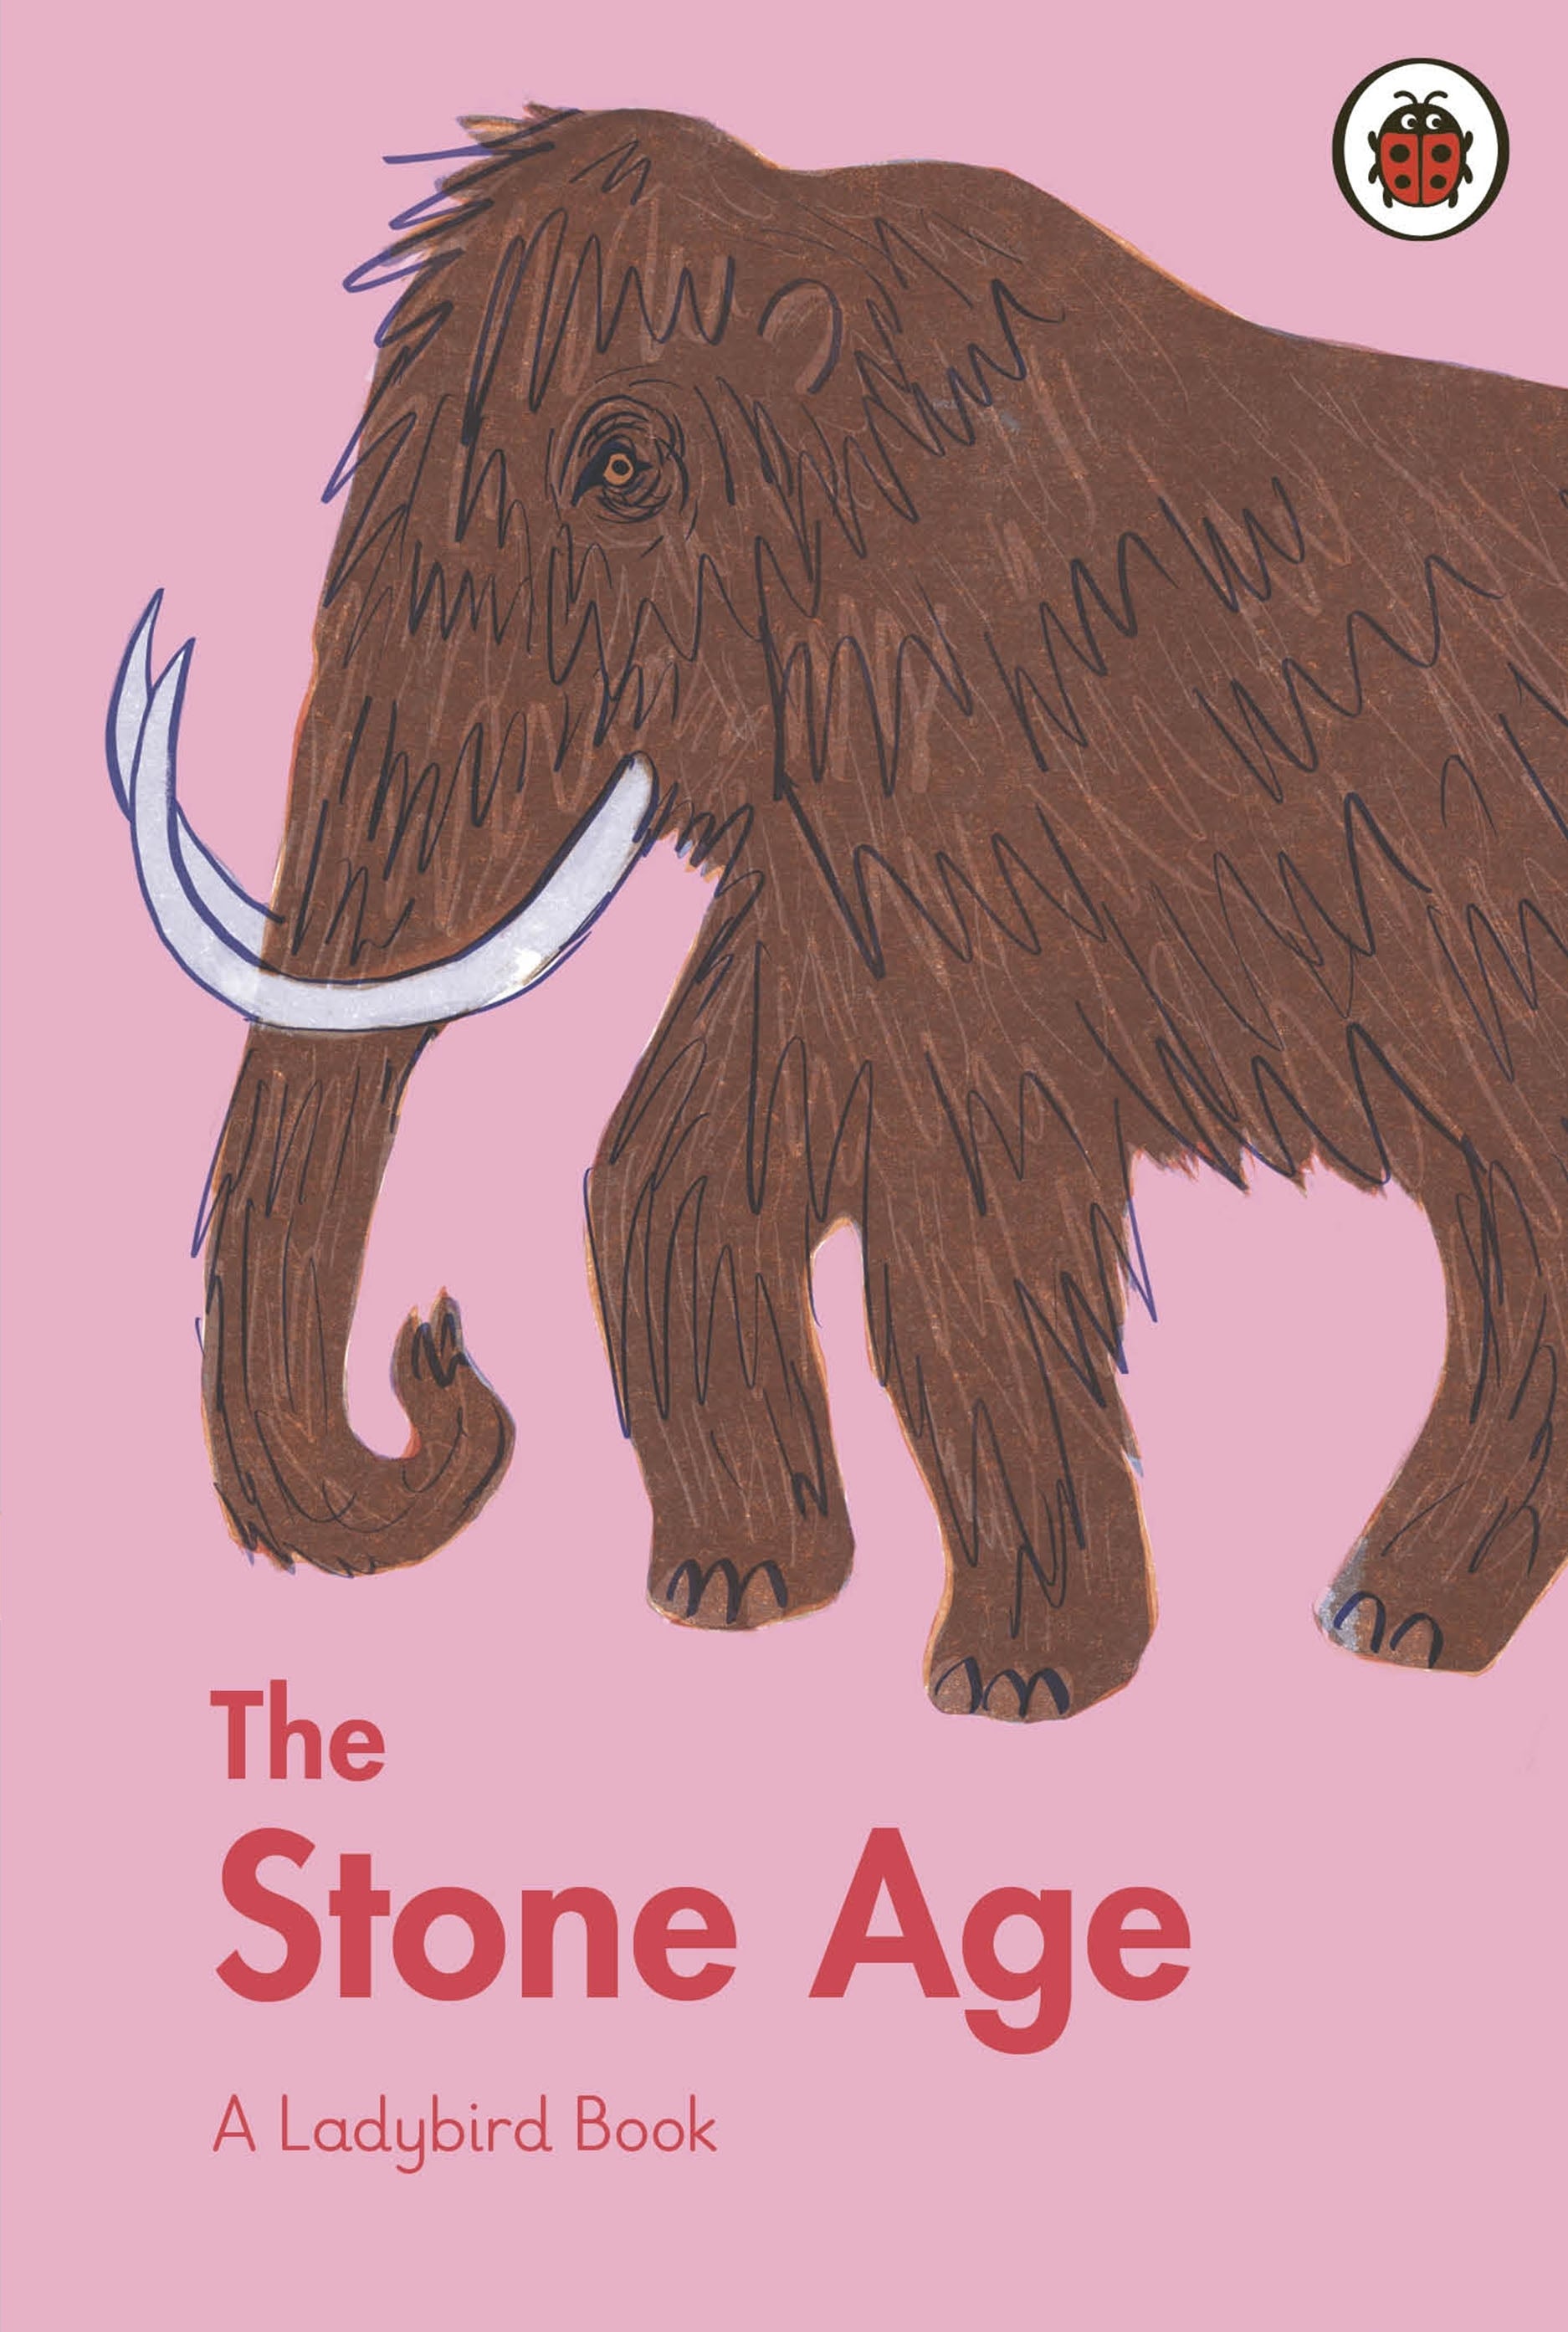 The Stone Age: A Ladybird Book